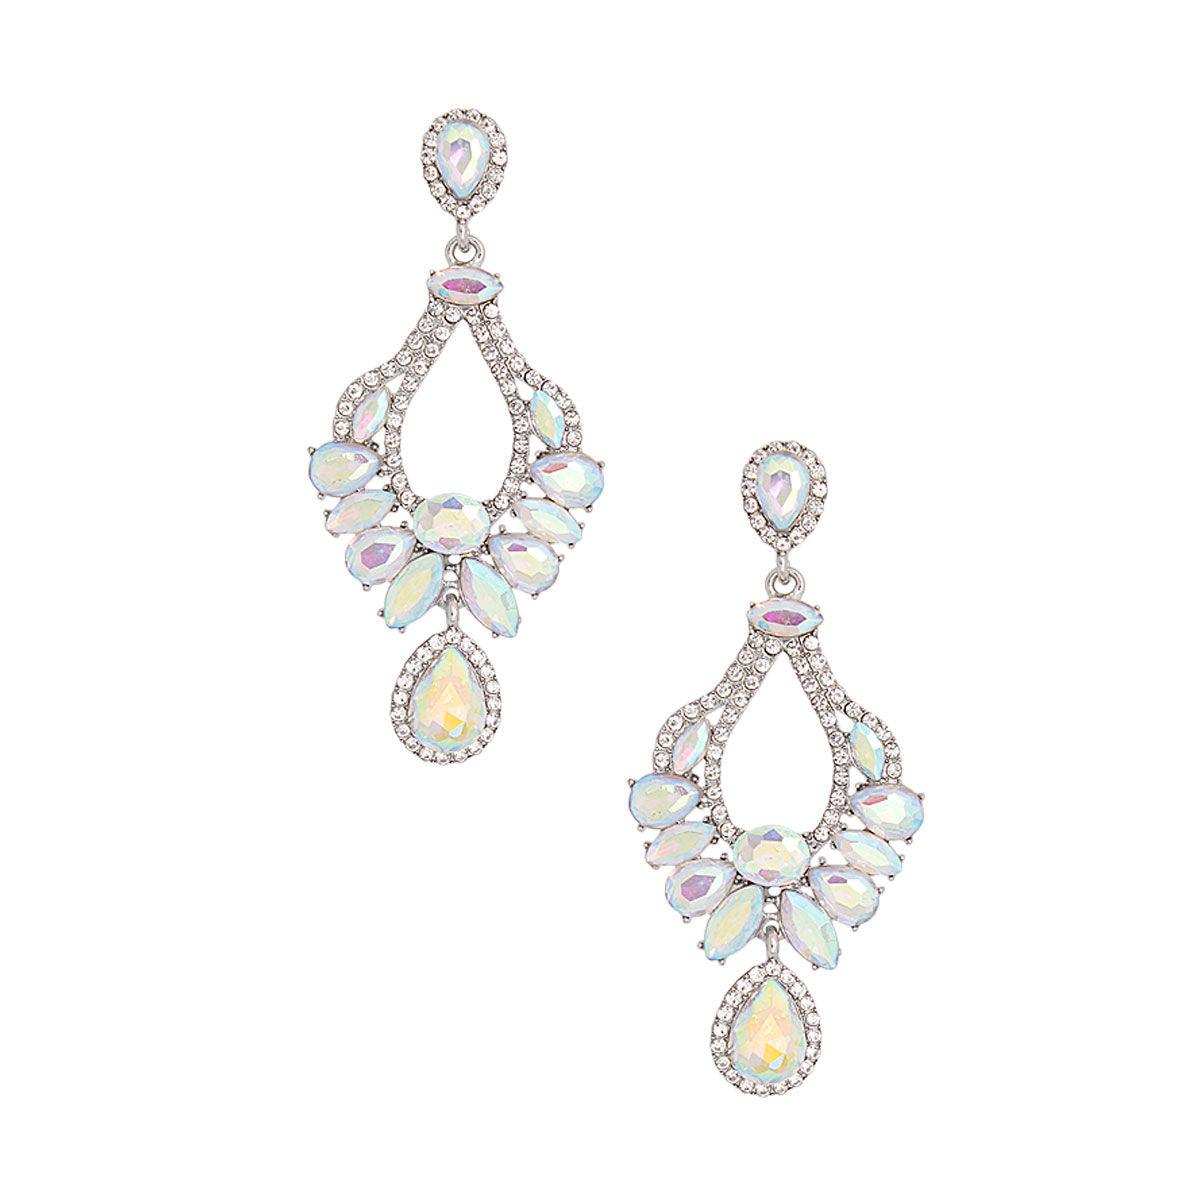 AB Statement Earrings - Your Ultimate Glam Accessory for Any Occasion